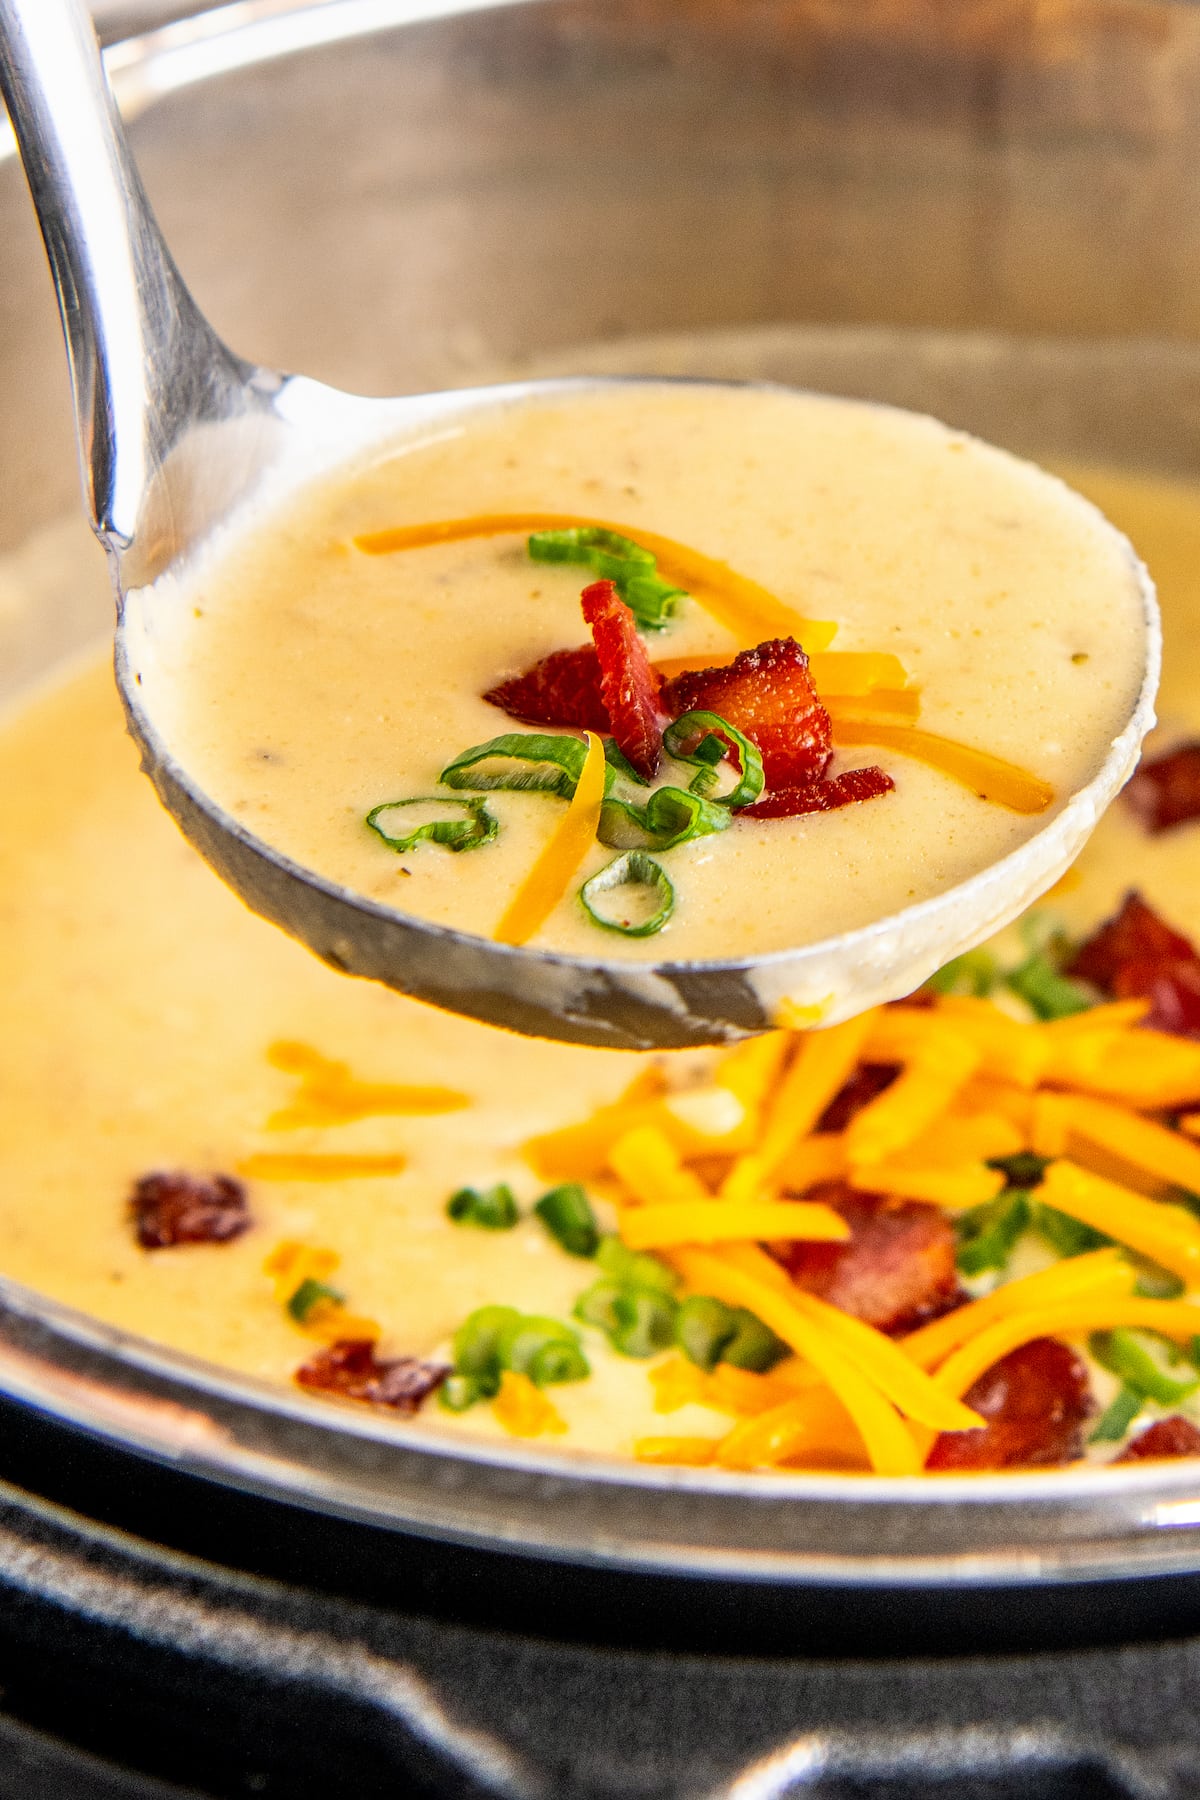 Ladling out a spoonful of smooth and creamy instant pot potato soup loaded with cheese, bacon and more.